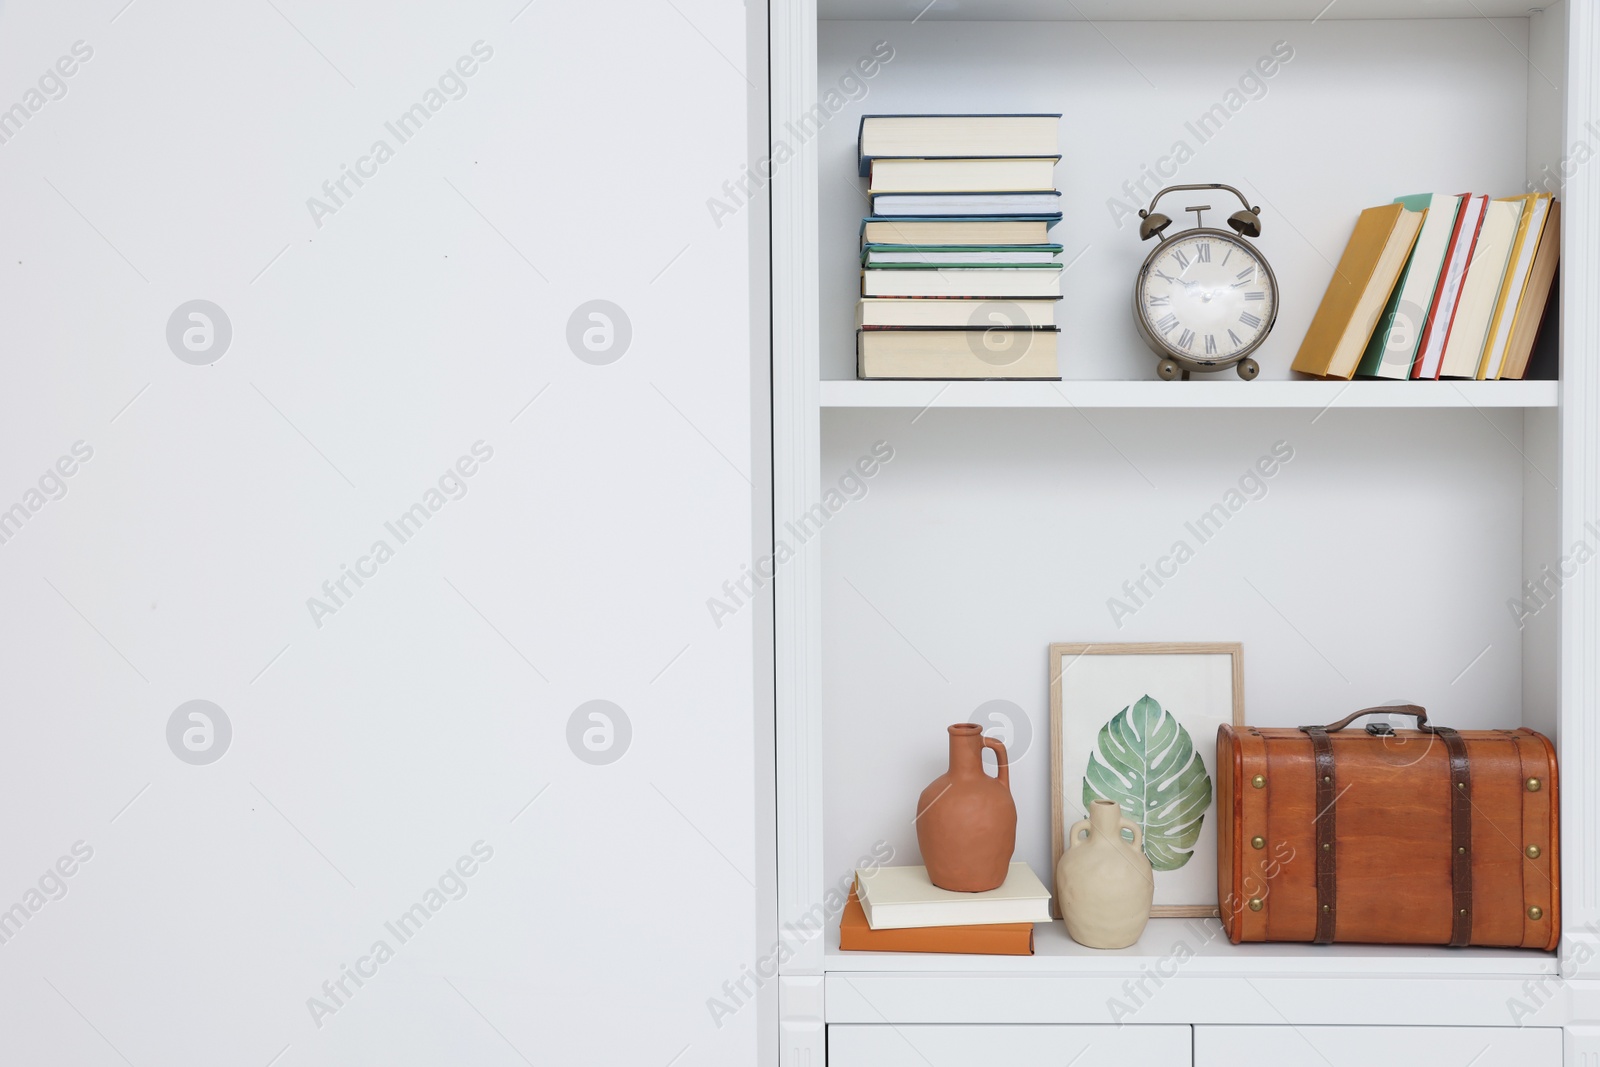 Photo of Books and different decorative elements on shelving unit indoors, space for text